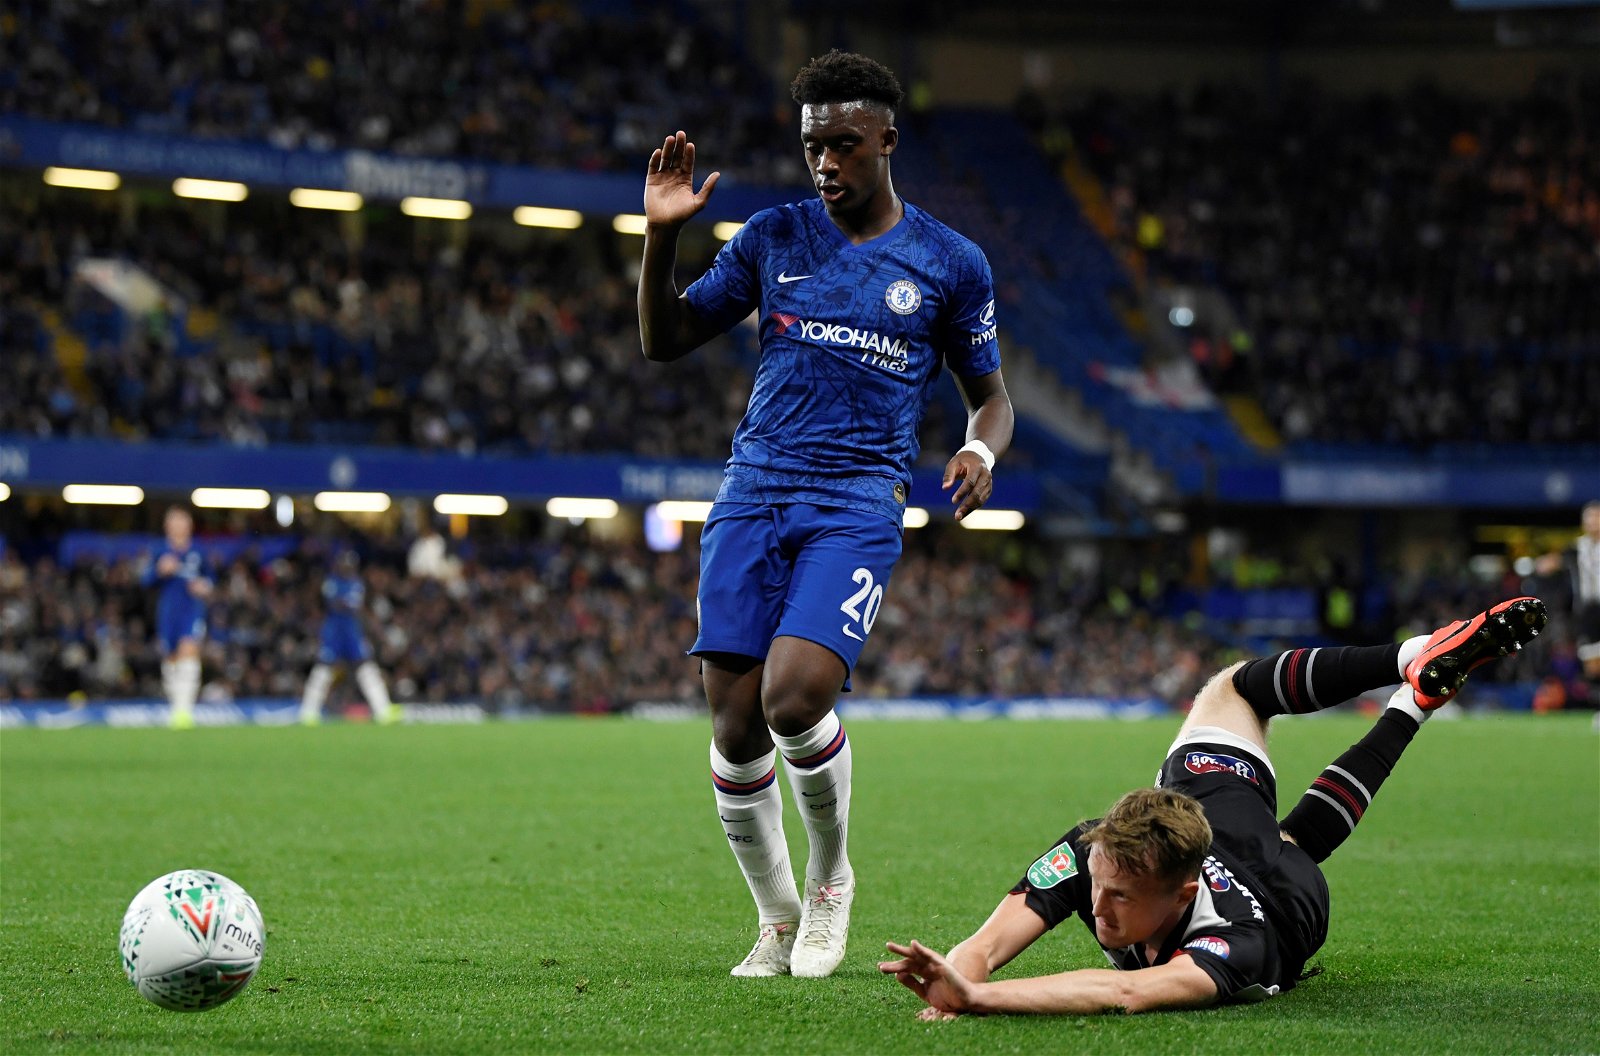 Lampard's view on Hudson-Odoi's performance against Newcastle